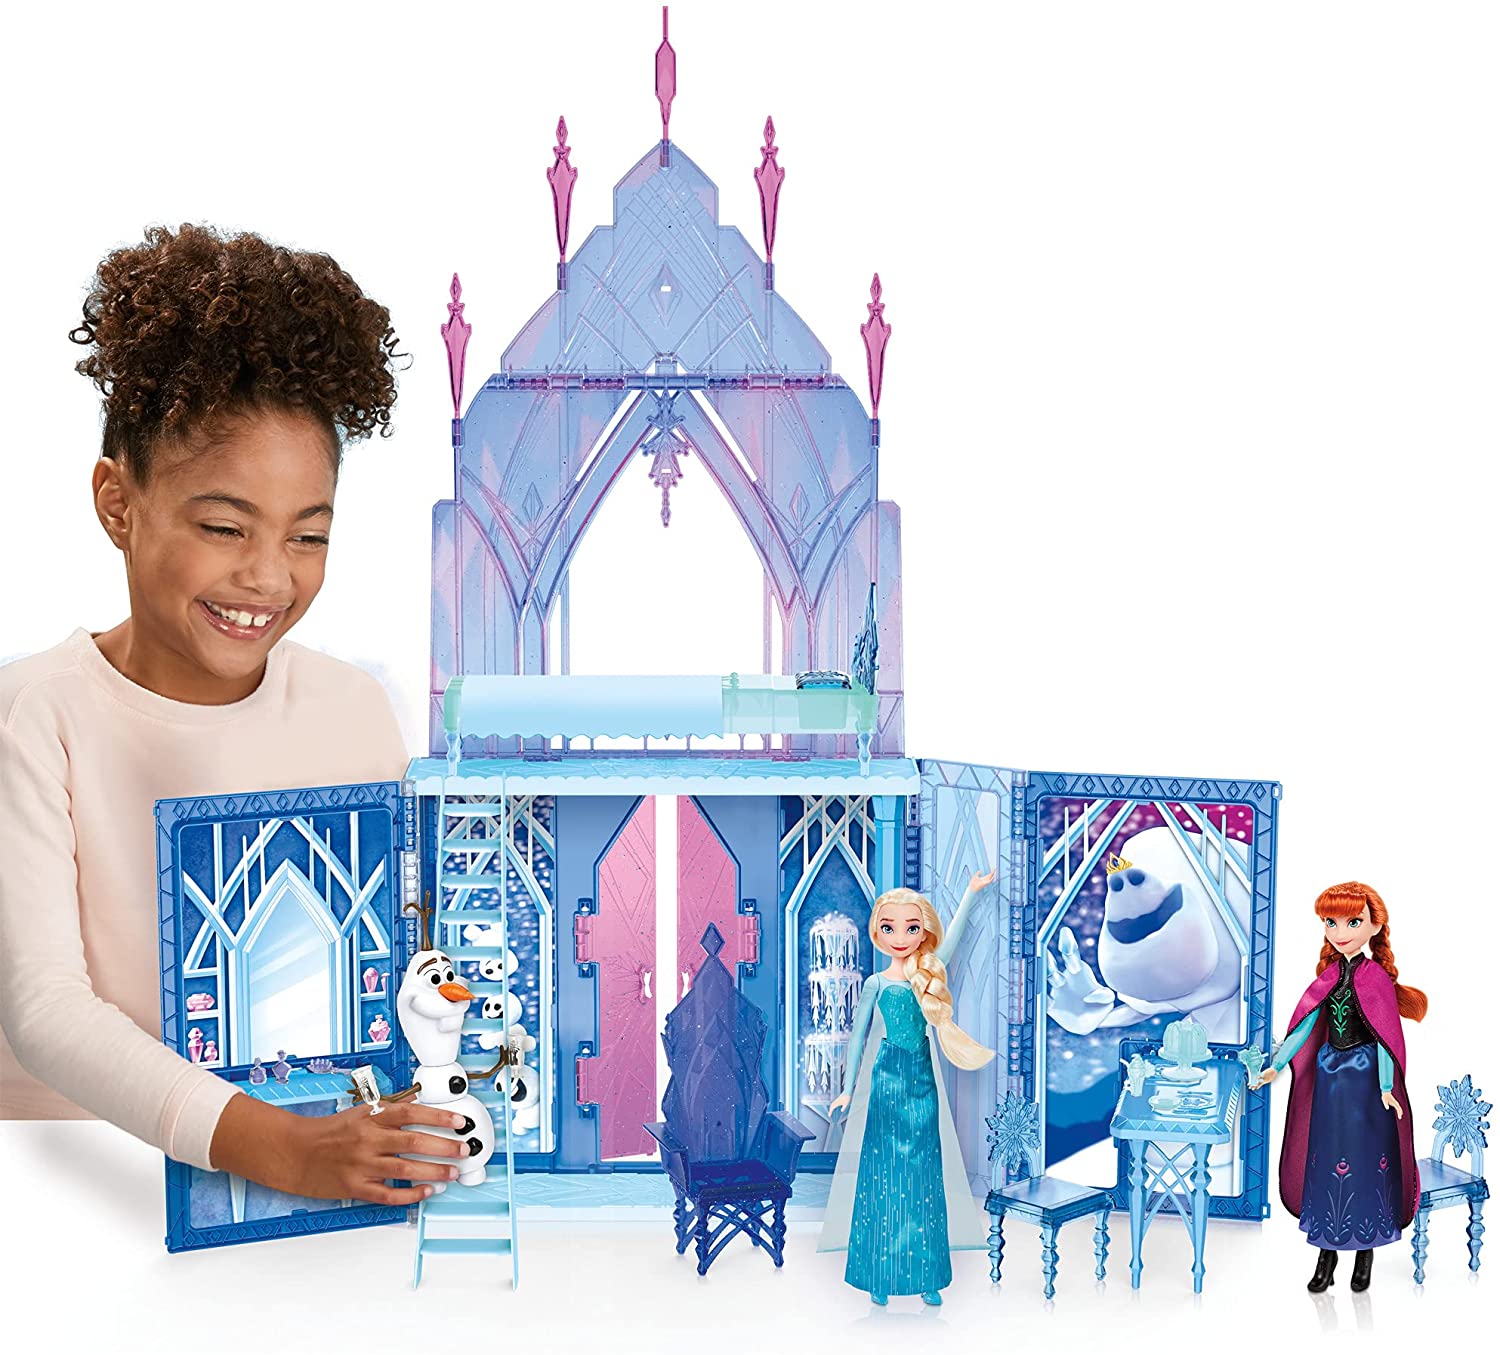 Disney Frozen 2 Elsa's Fold and Go Ice Palace Playset w/ 20 Accessories & Olaf Doll $28 + Free Shipping